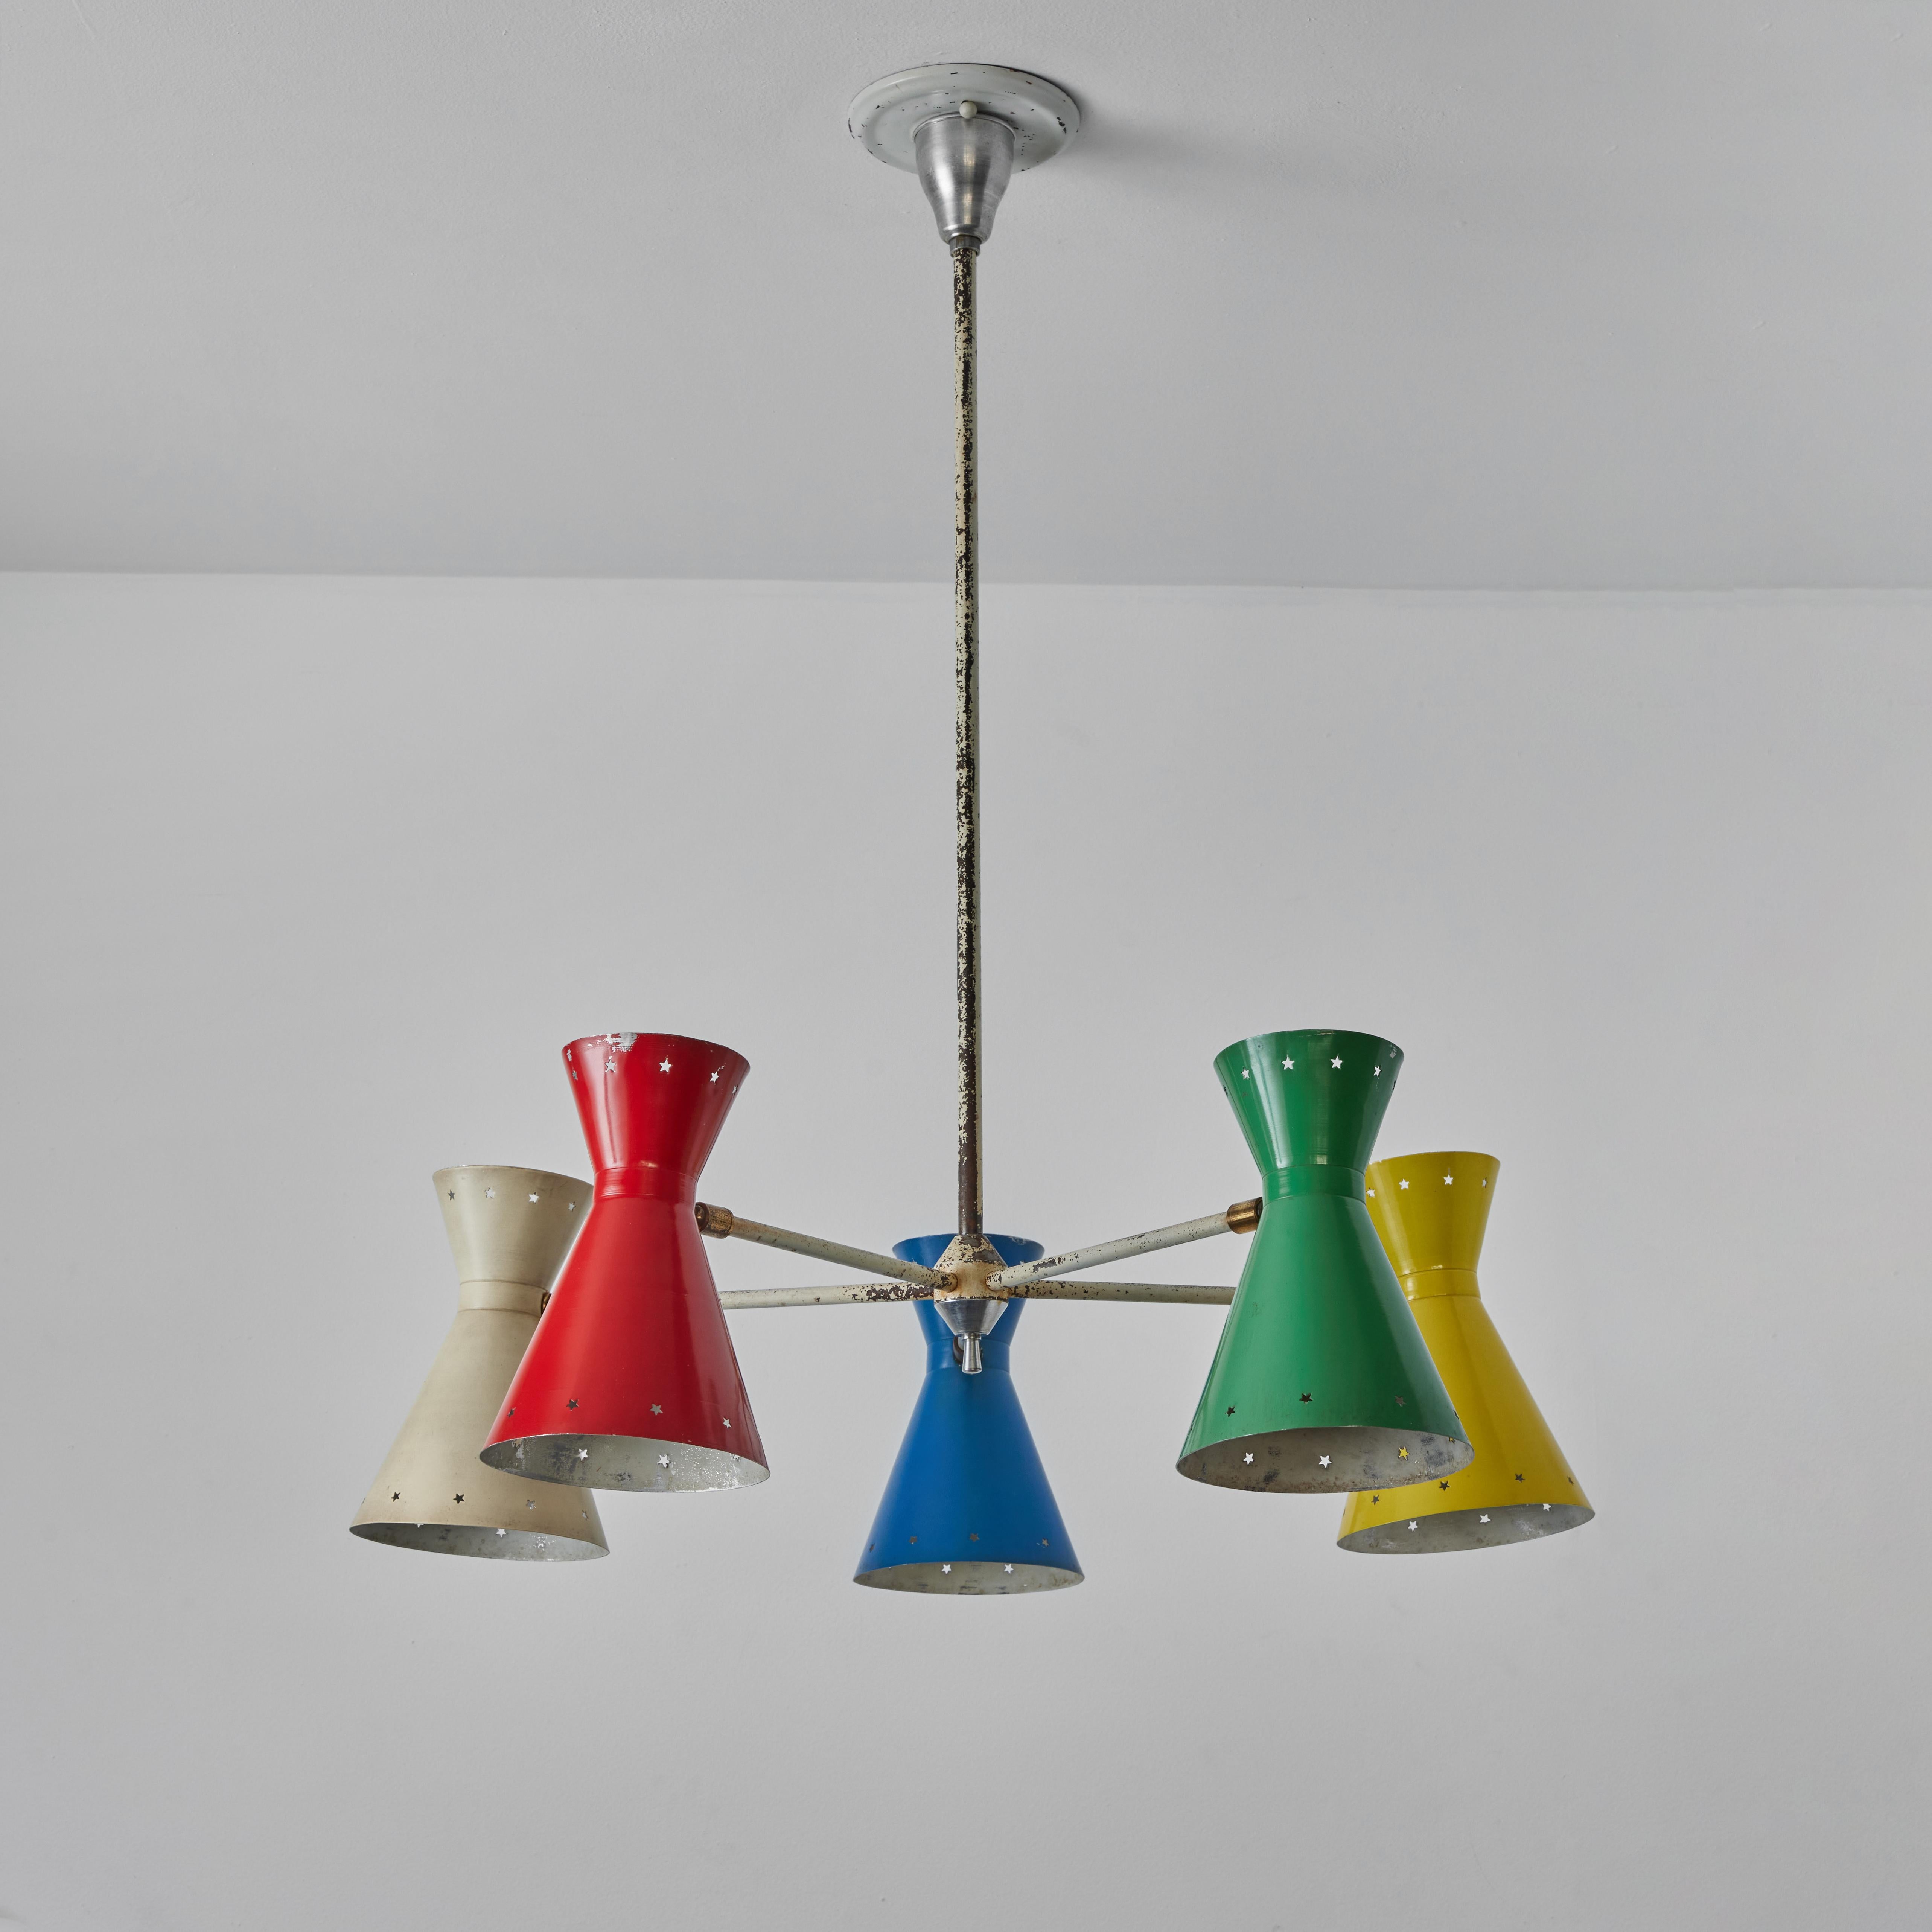 Rare 1950s Robert Mathieu 5-shade multi color chandelier. Executed in multi color original painted metal with star perforations. A bright and sculptural chandelier highly indicative of the iconic mid-century Italian designs of